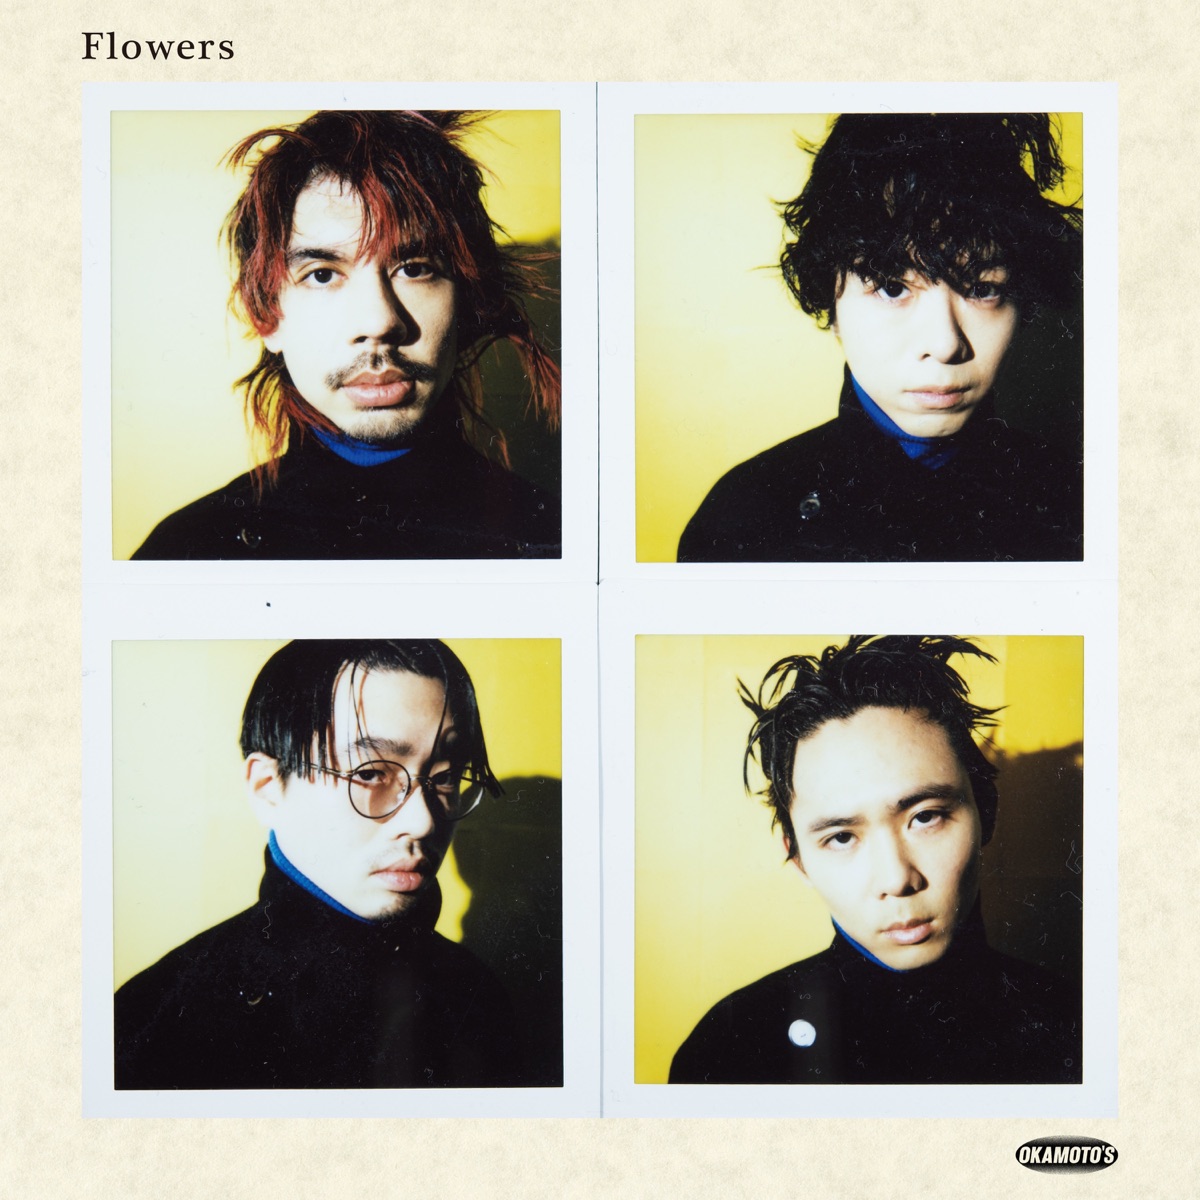 Cover art for『OKAMOTO'S - Itsumo, Endless』from the release『Flowers』